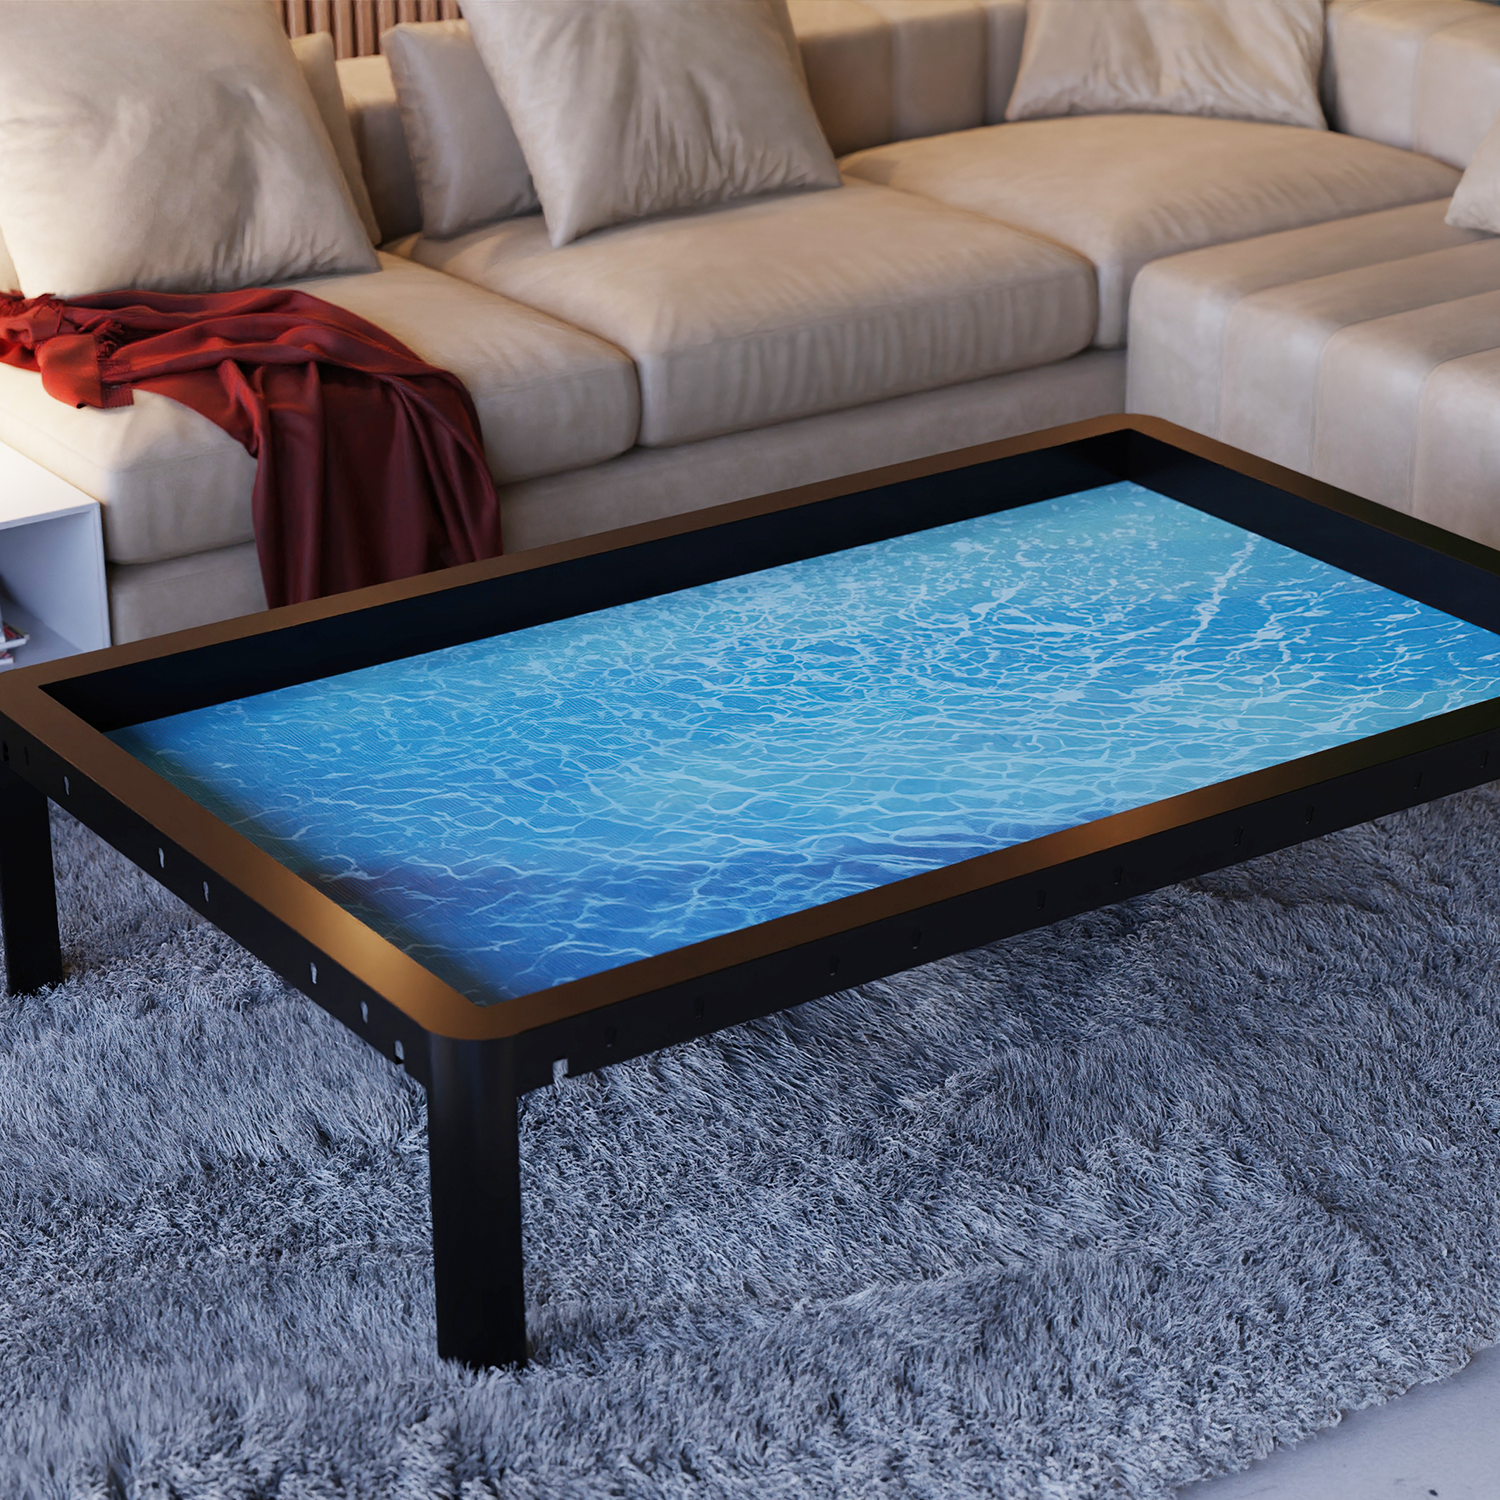 COFFEE TABLE Conversion Kit